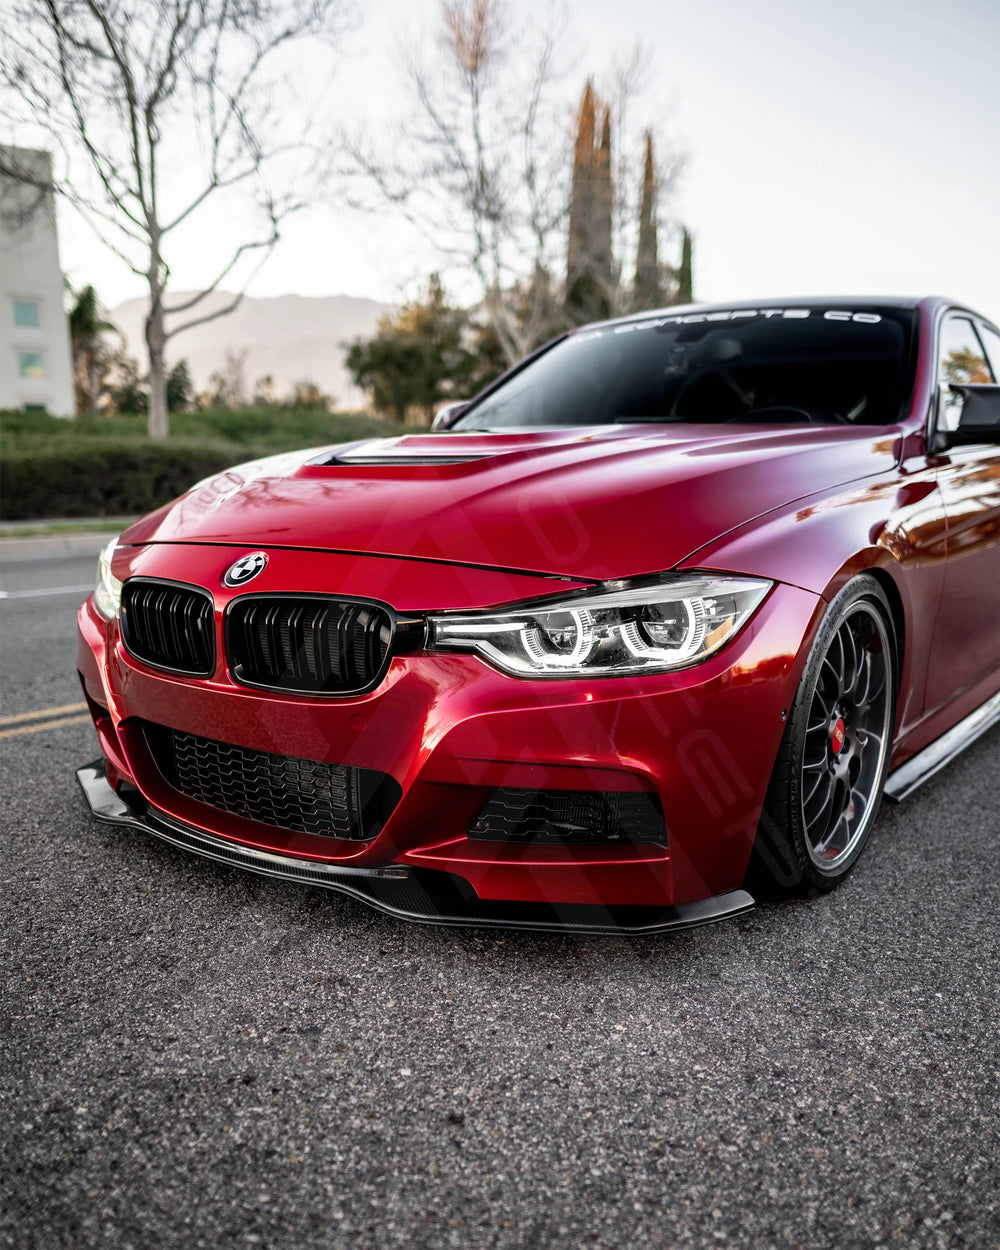 BMW M3 Style Front Grille for F30